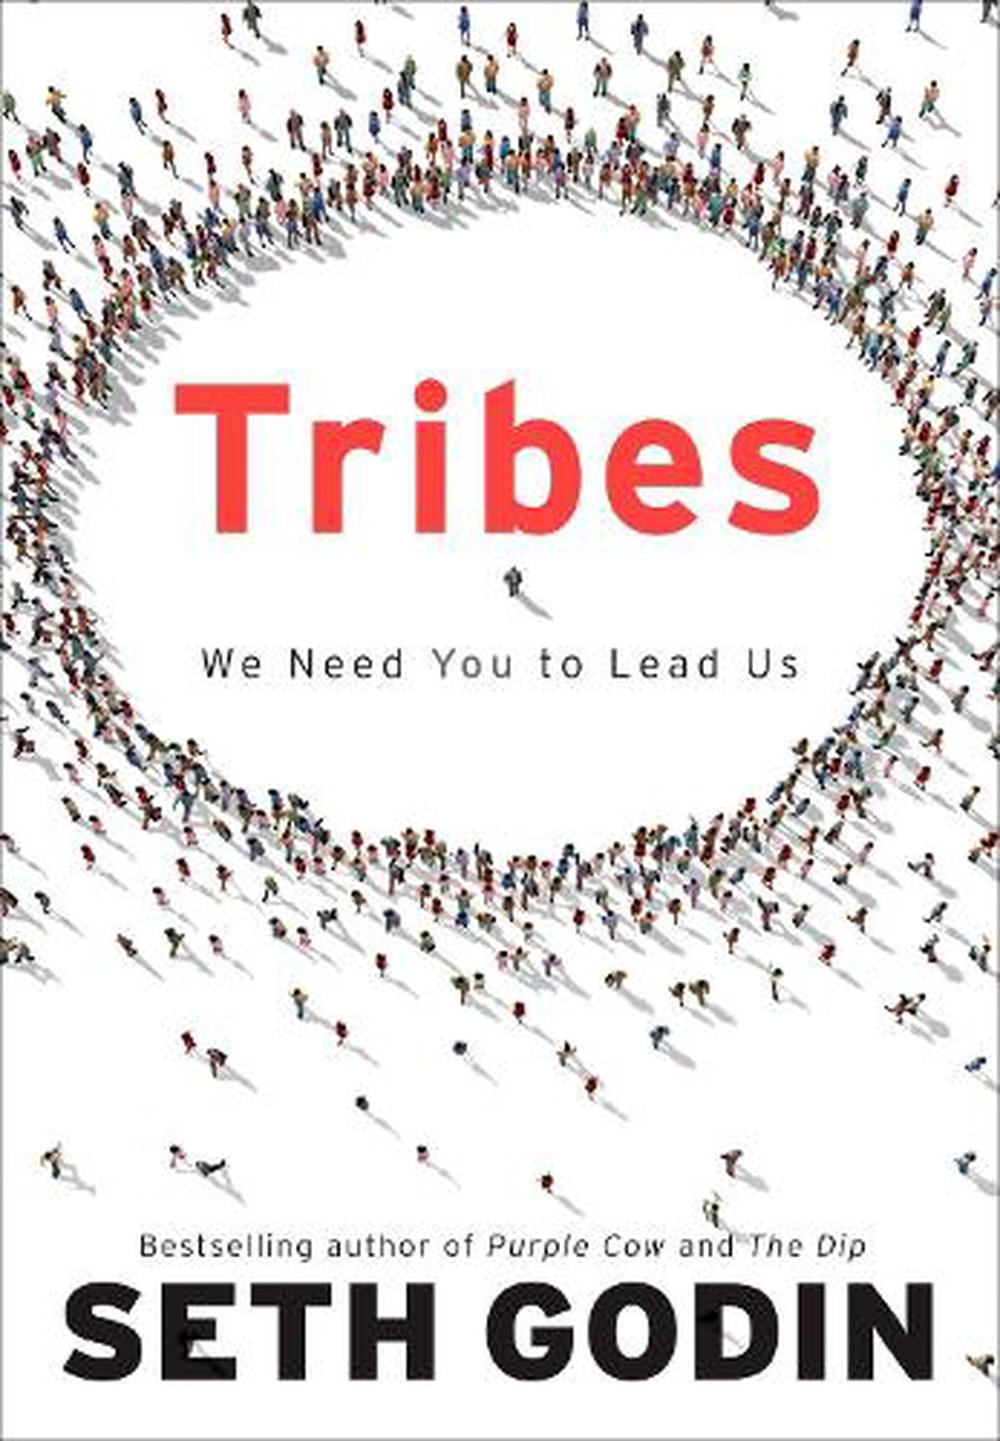 Tribes: We Need You to Lead Us (Hardcover) - image 1 of 1